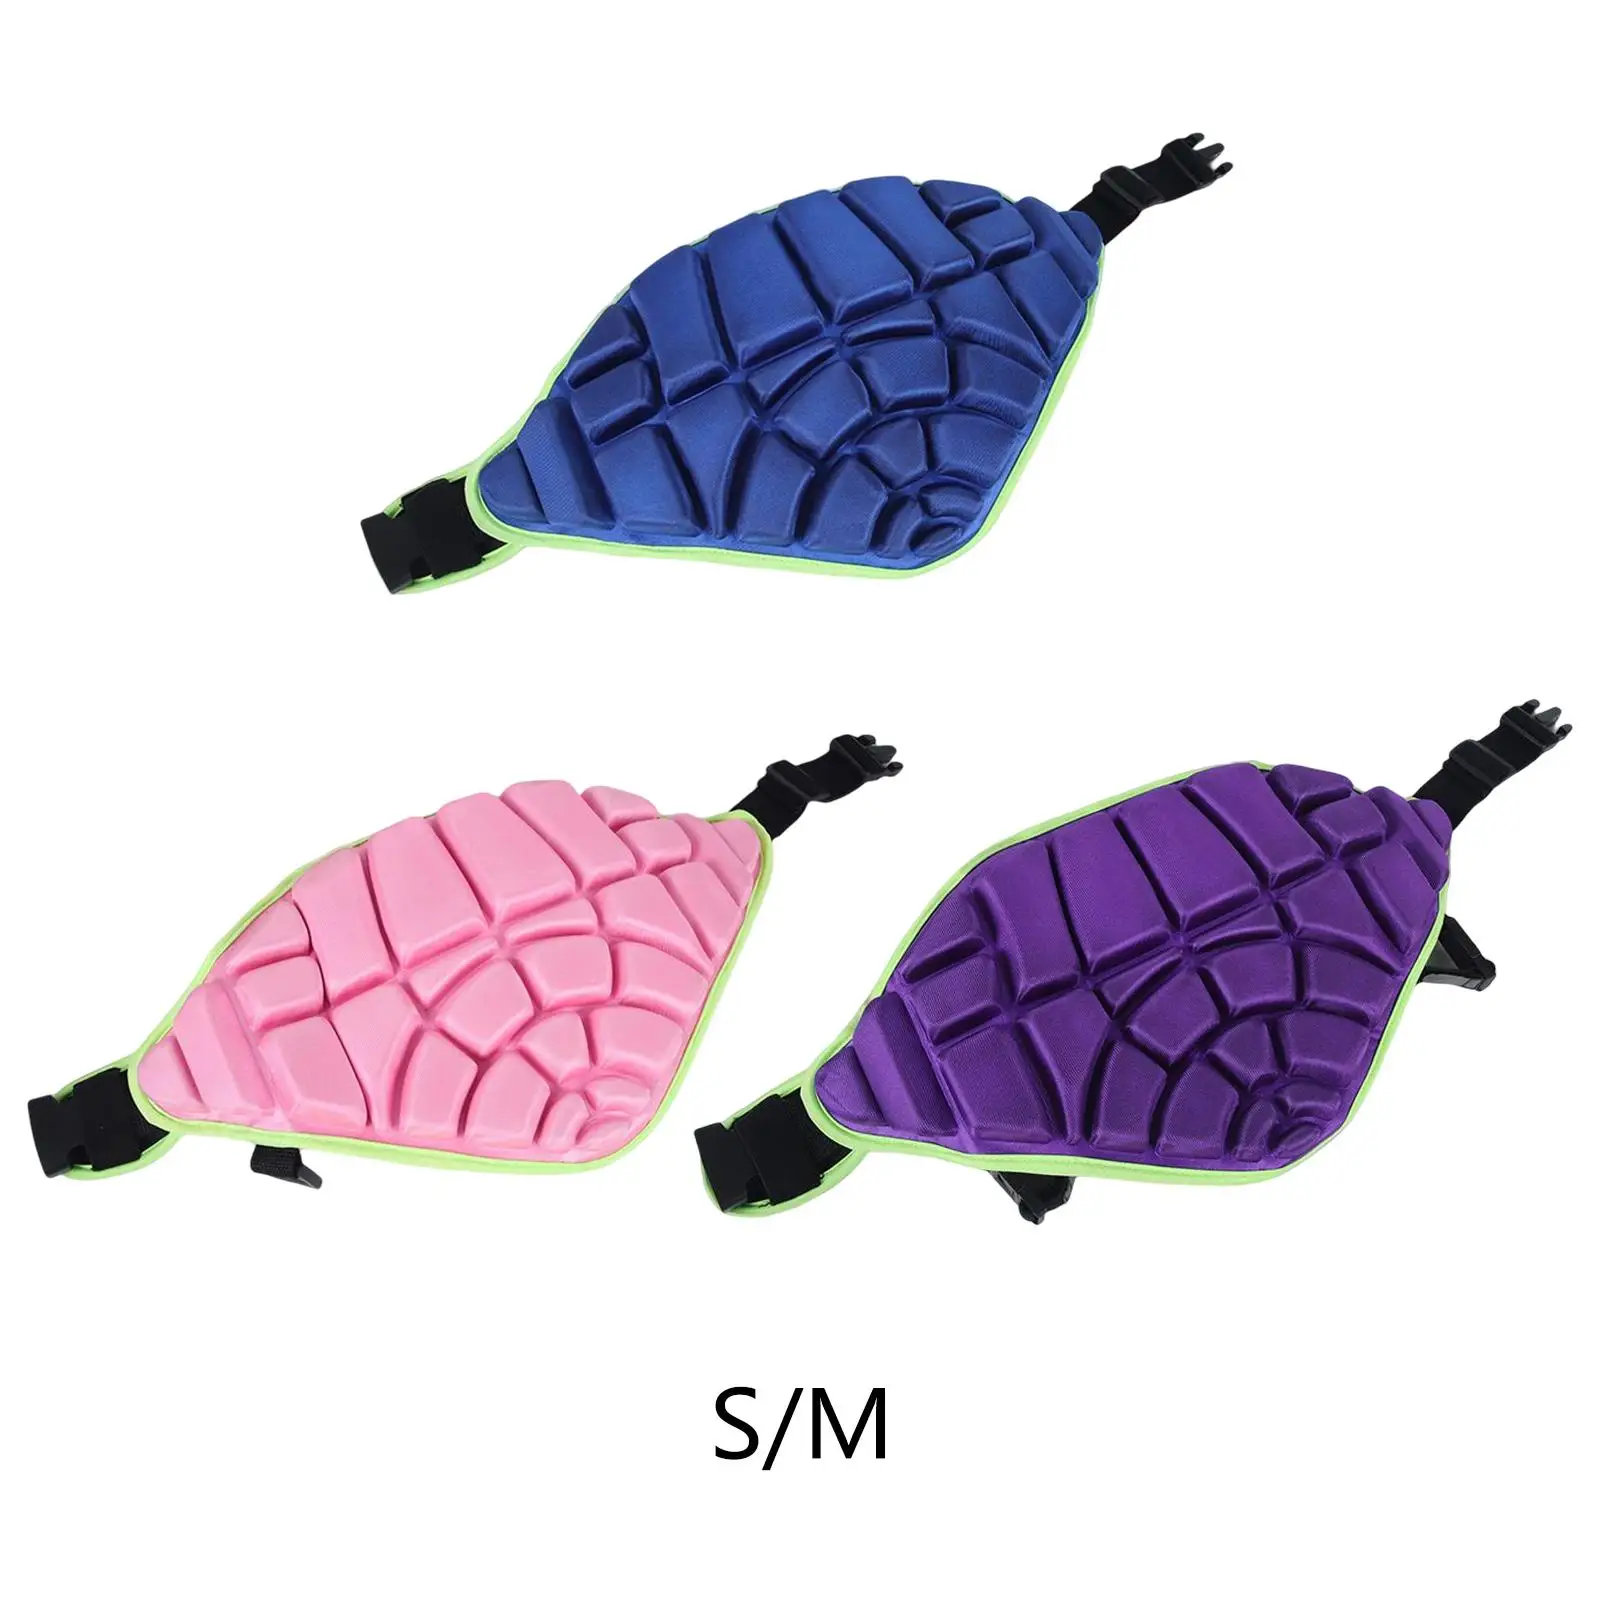 Children Sports Butt Pad Thicken EVA Padded Hip Protector Adjustable Kids Hip Protective Pad Heavy Duty Gear for Skating